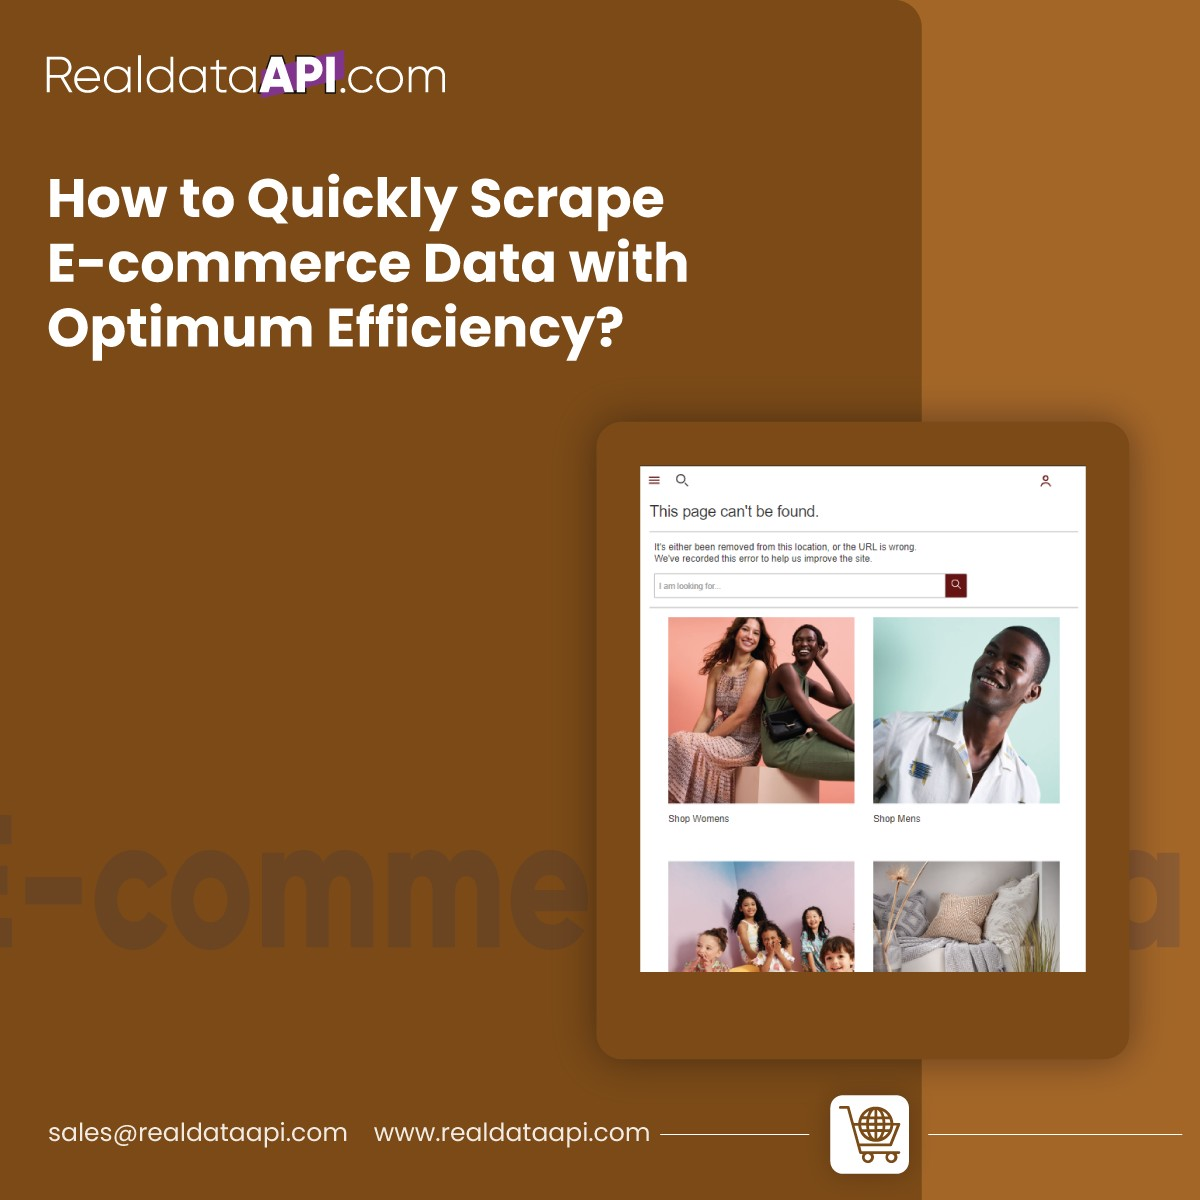 How to Quickly Scrape E-commerce Data with Optimum Efficiency